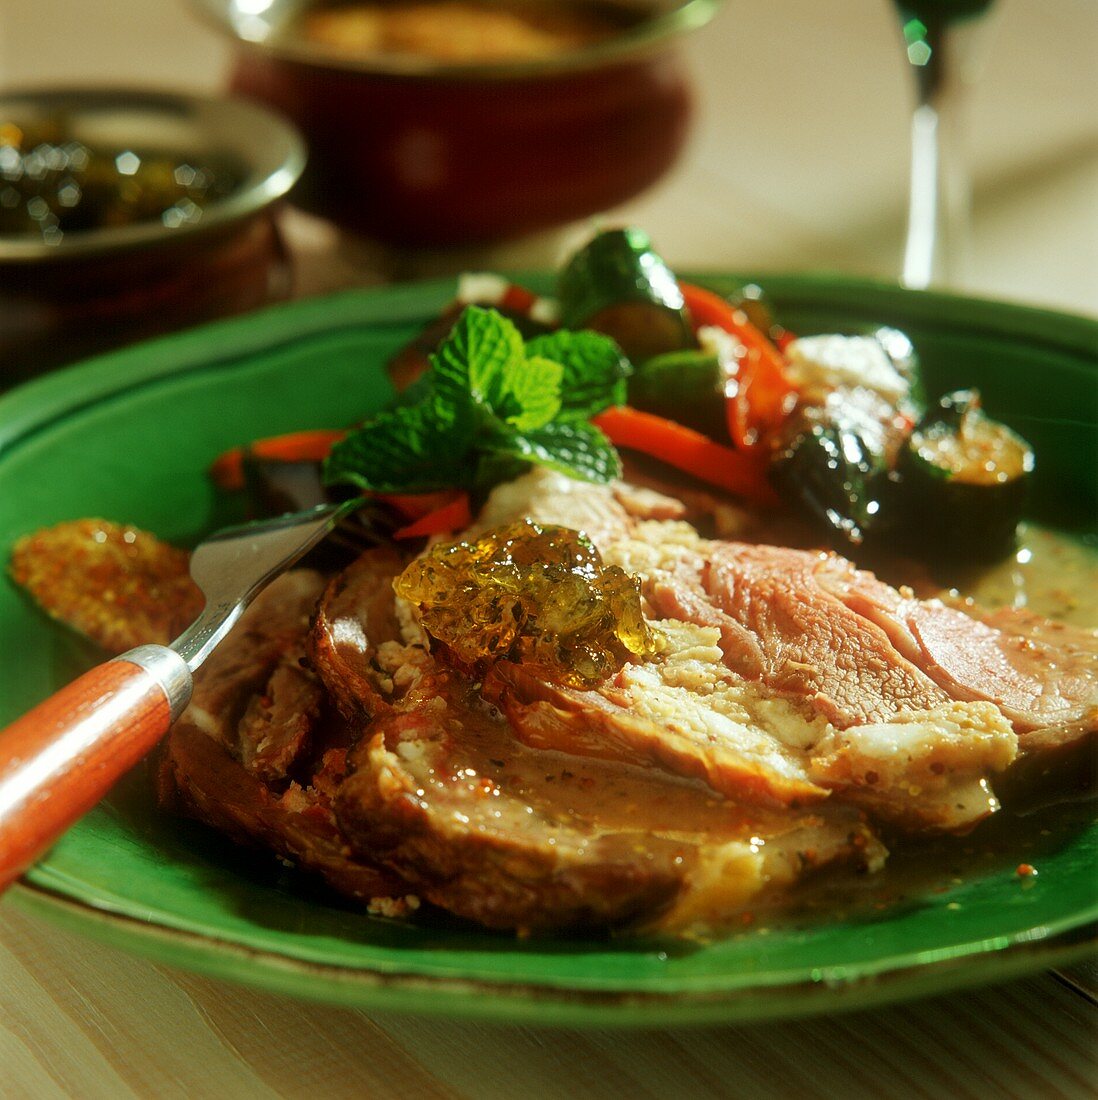 Roast lamb with vegetables and mint jelly